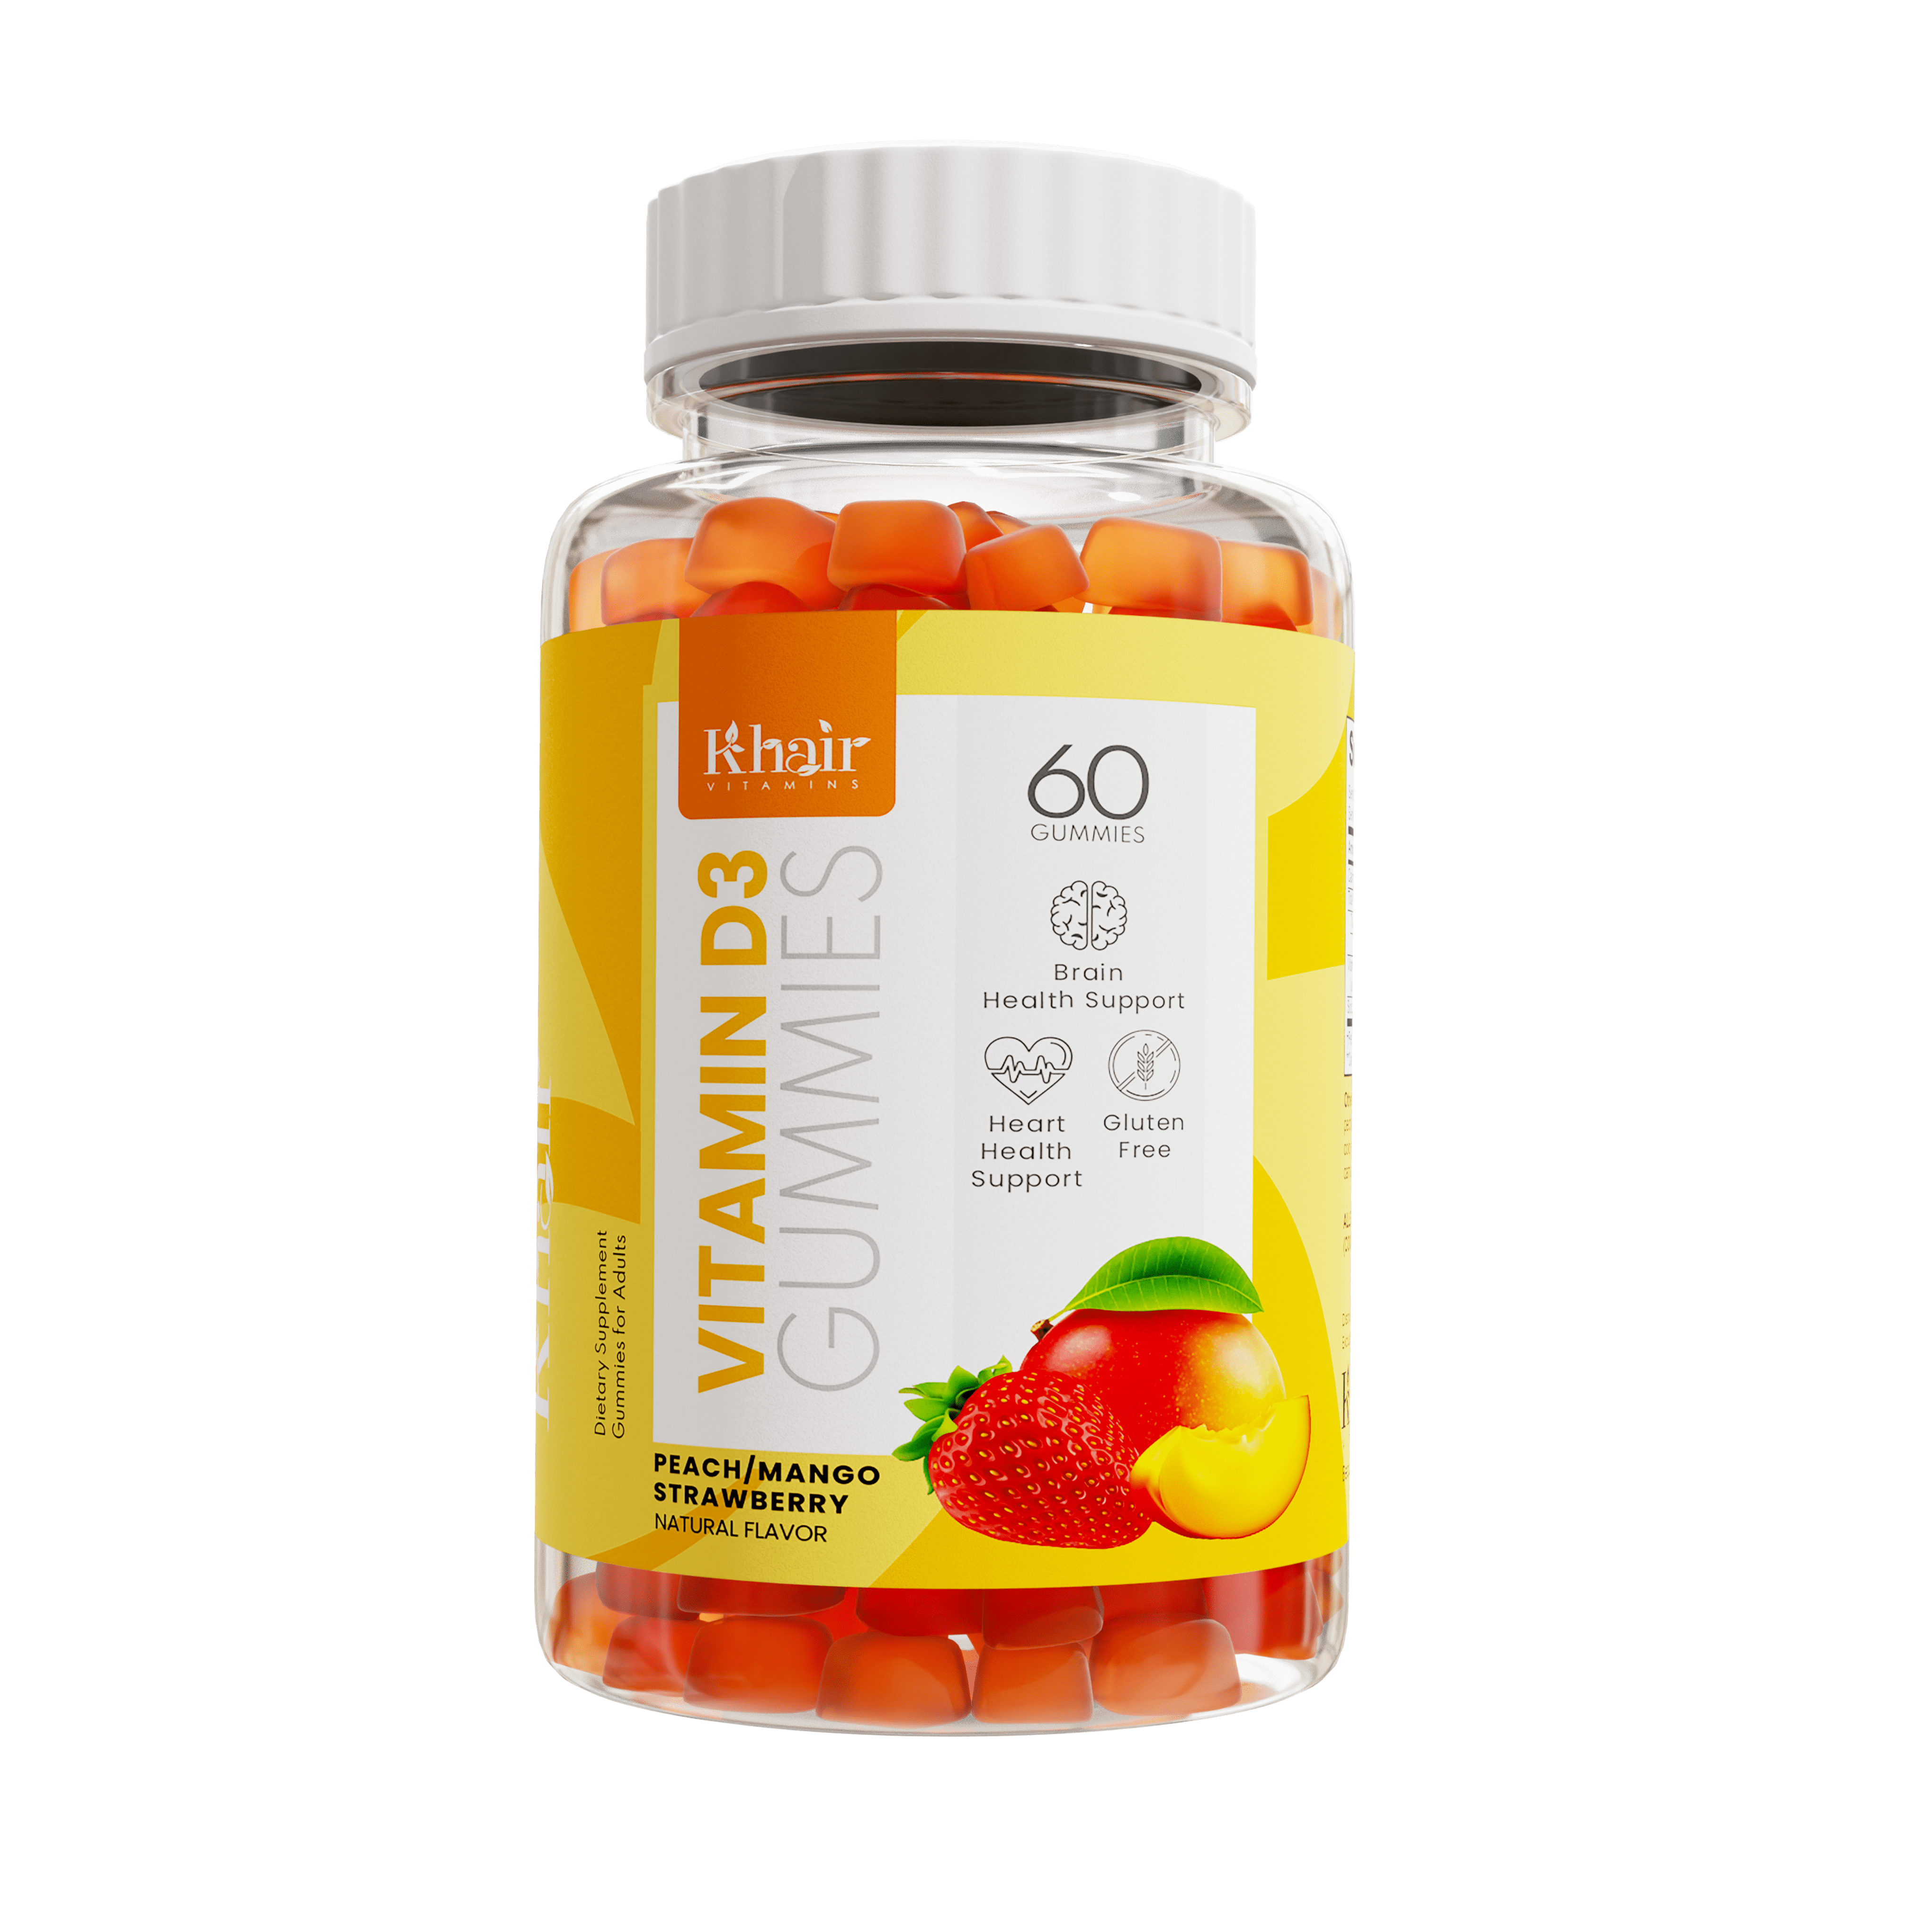 A container of Khair Vitamin D3 Gummies featuring 60 gummies for supporting cognitive and cardiac health, gluten-free, and offered in a combination of peach, mango, and strawberry natural flavors, all wrapped with a vibrant yellow label.